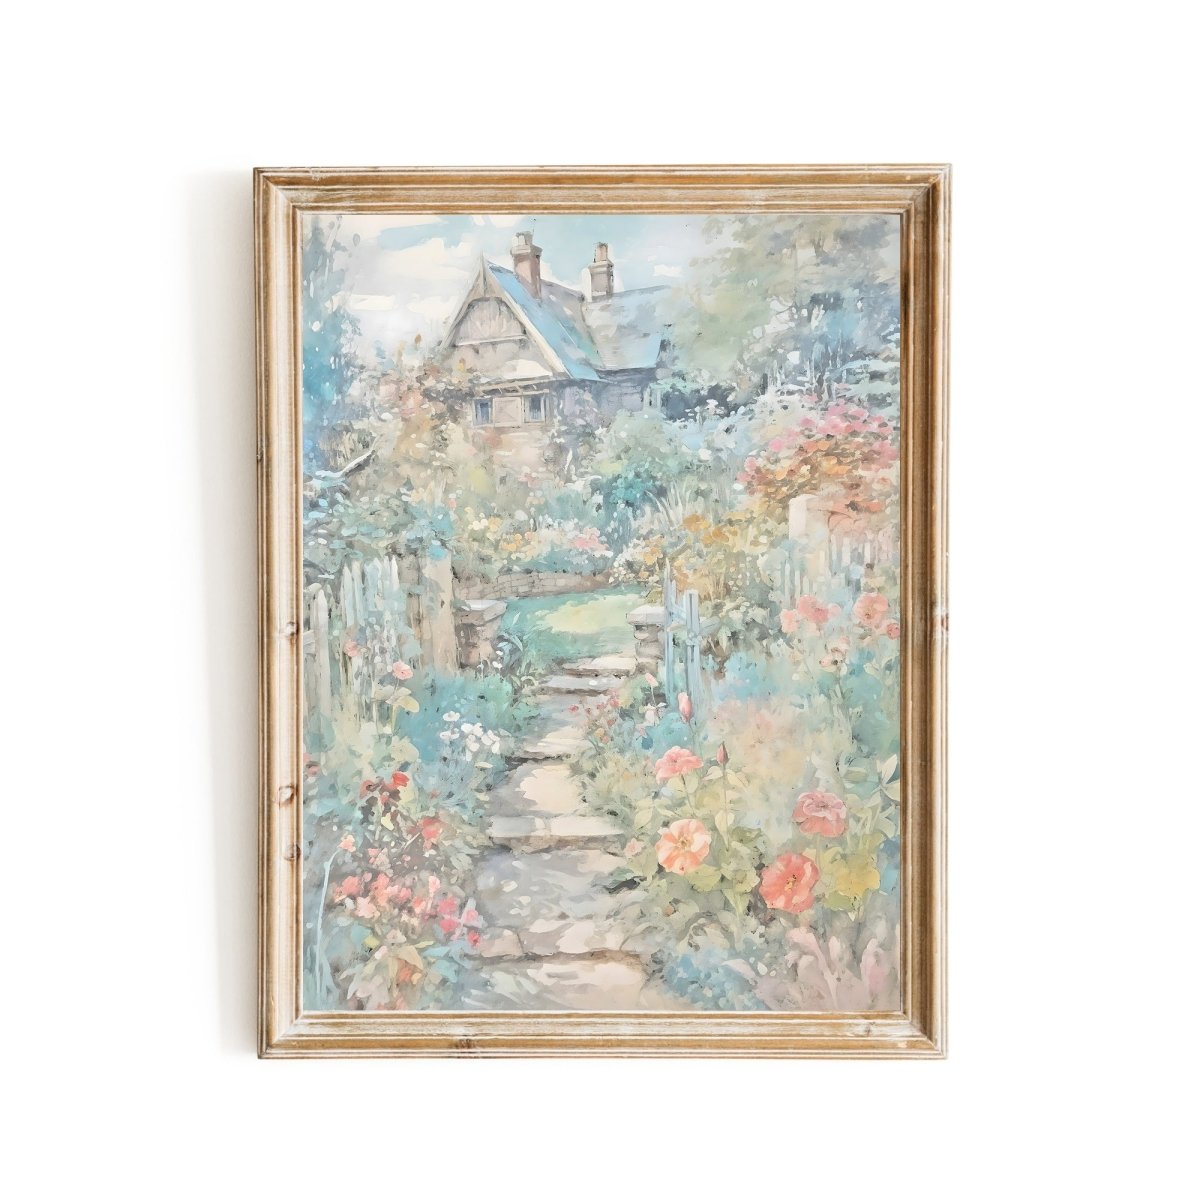 French Countryside Watercolor Wall Art Hidden Cottage Among Blooming Flowers - Everything Pixel